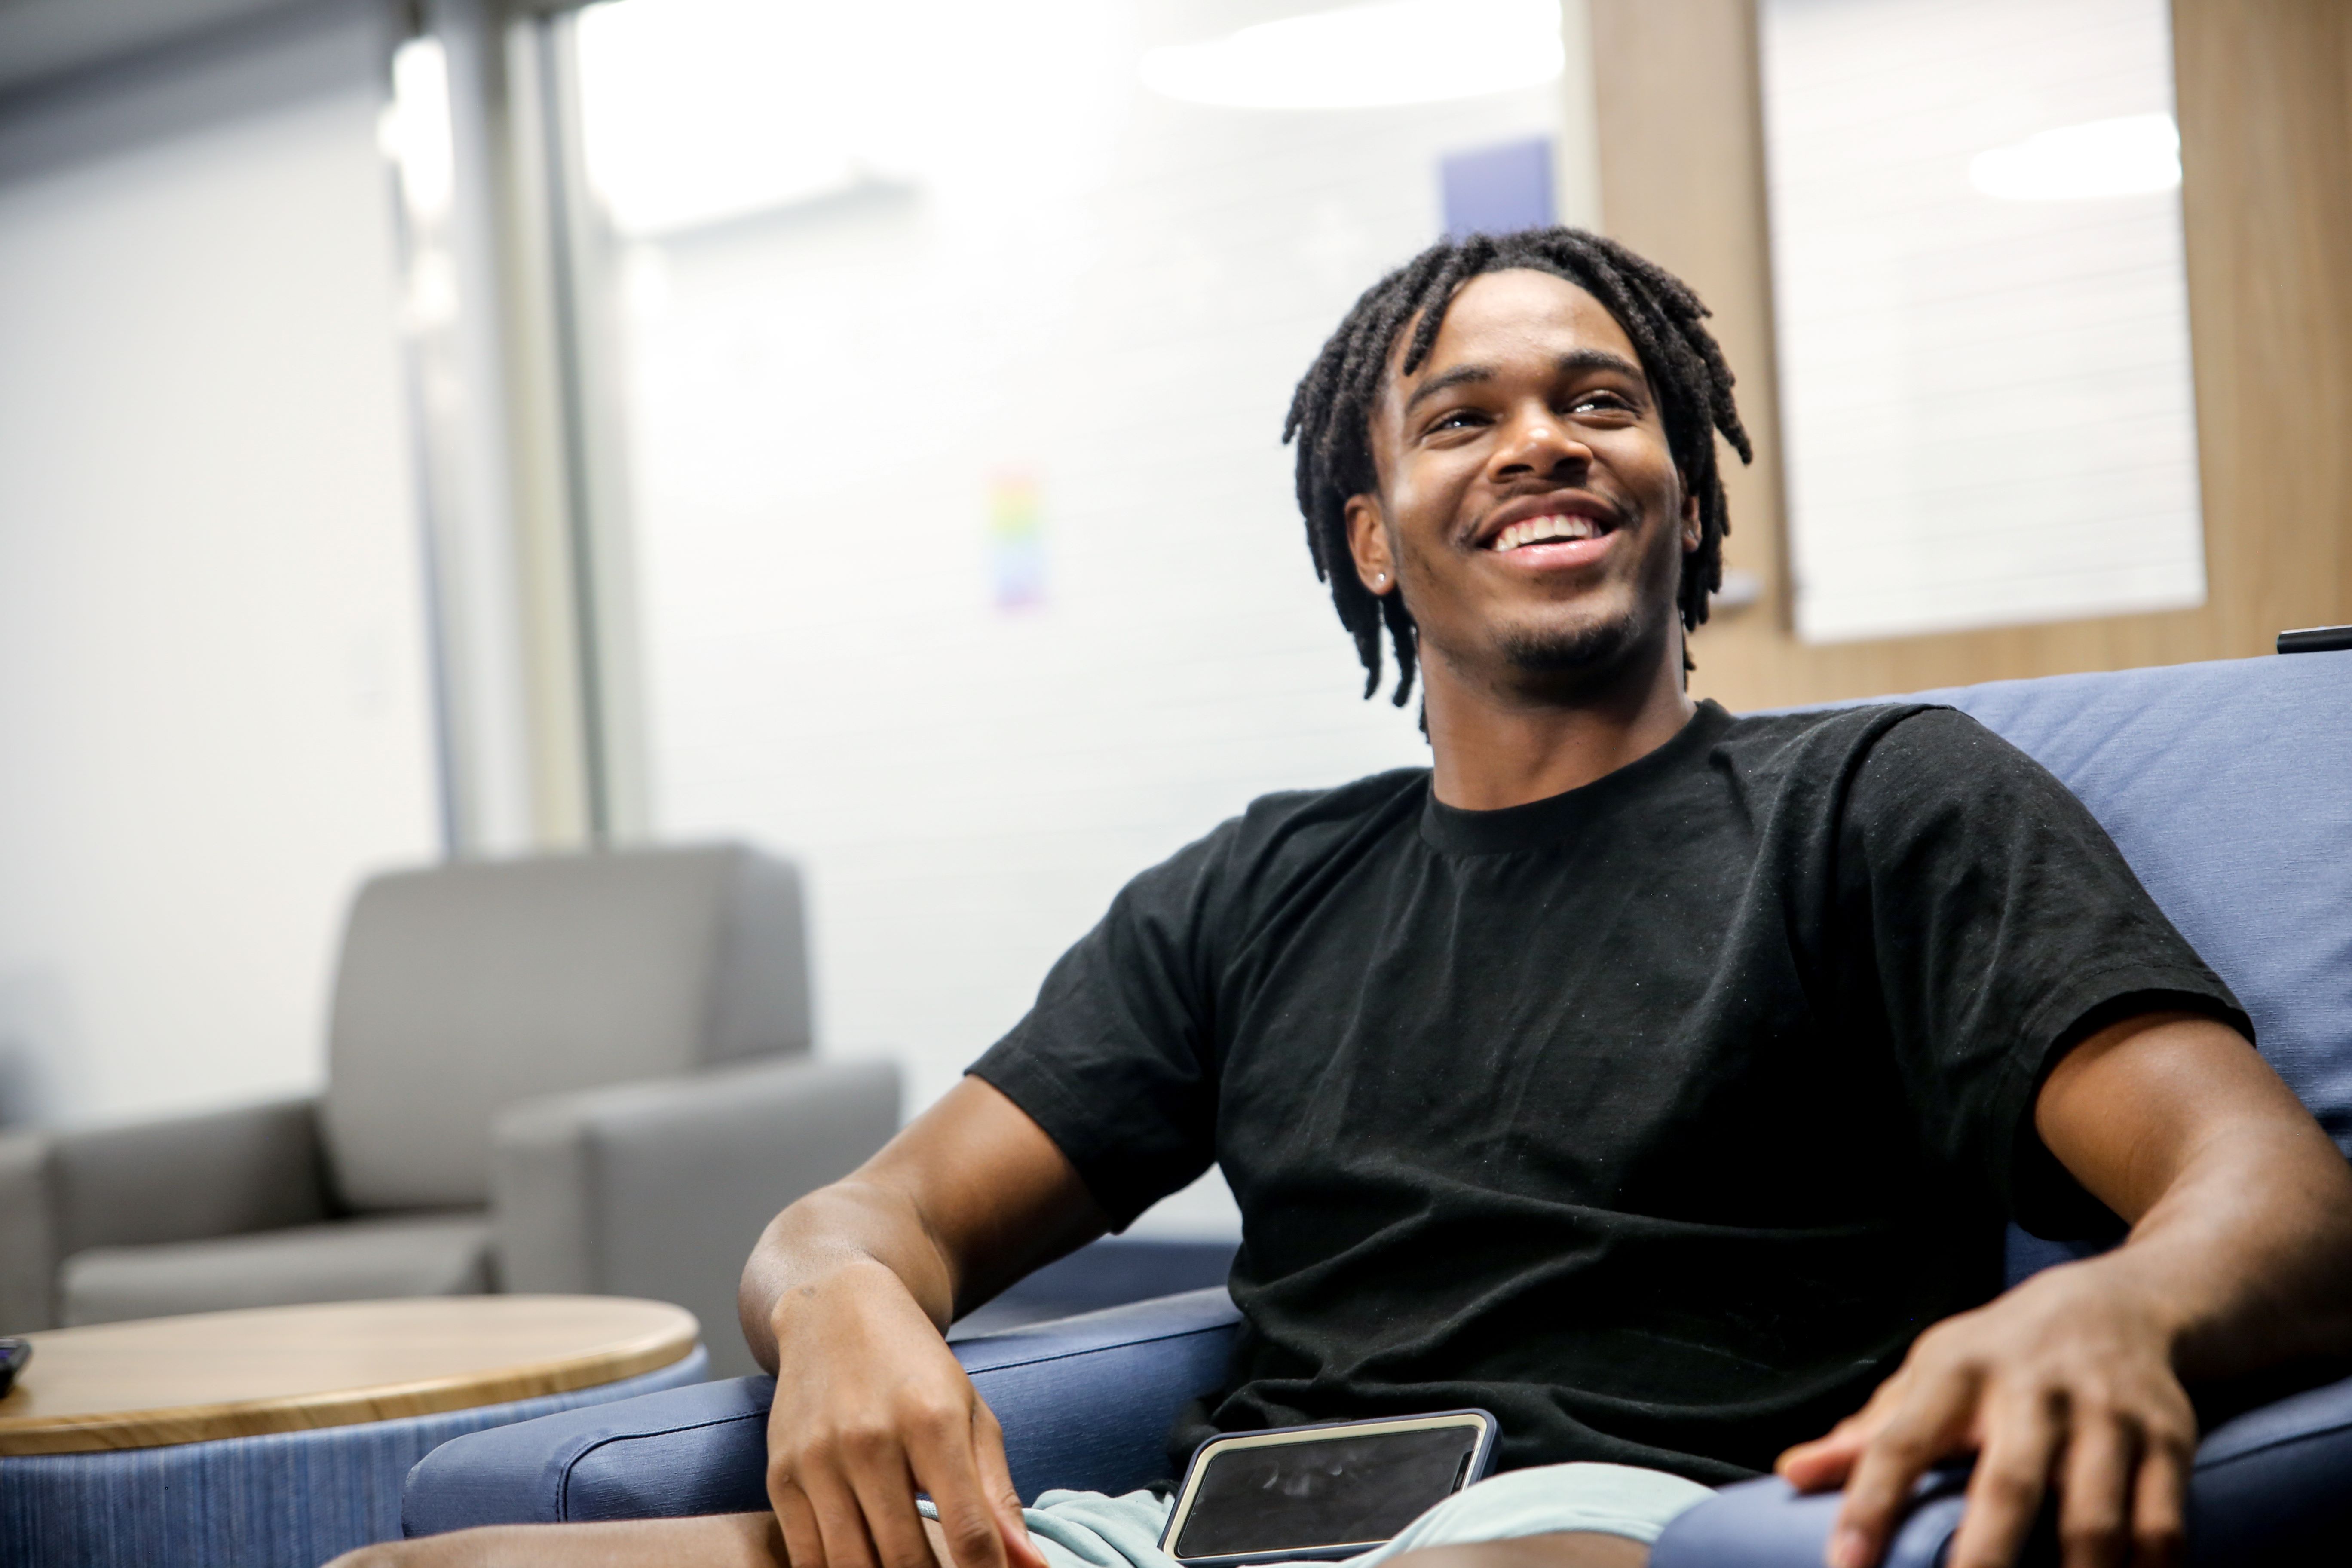 student smiling while sitting in dorm room